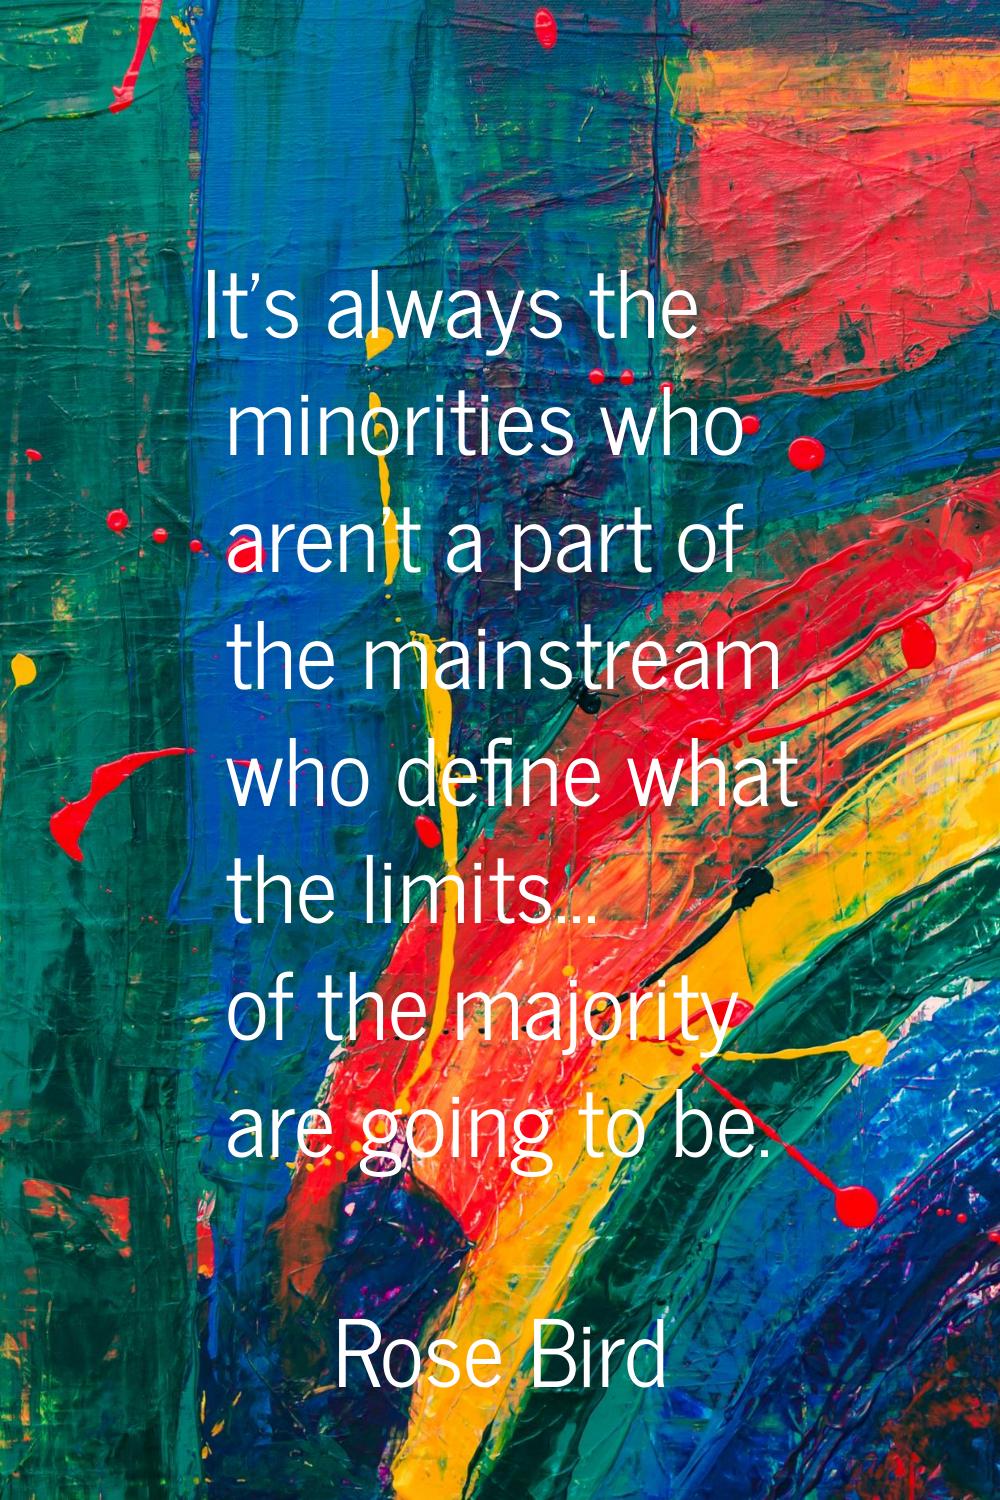 It's always the minorities who aren't a part of the mainstream who define what the limits... of the